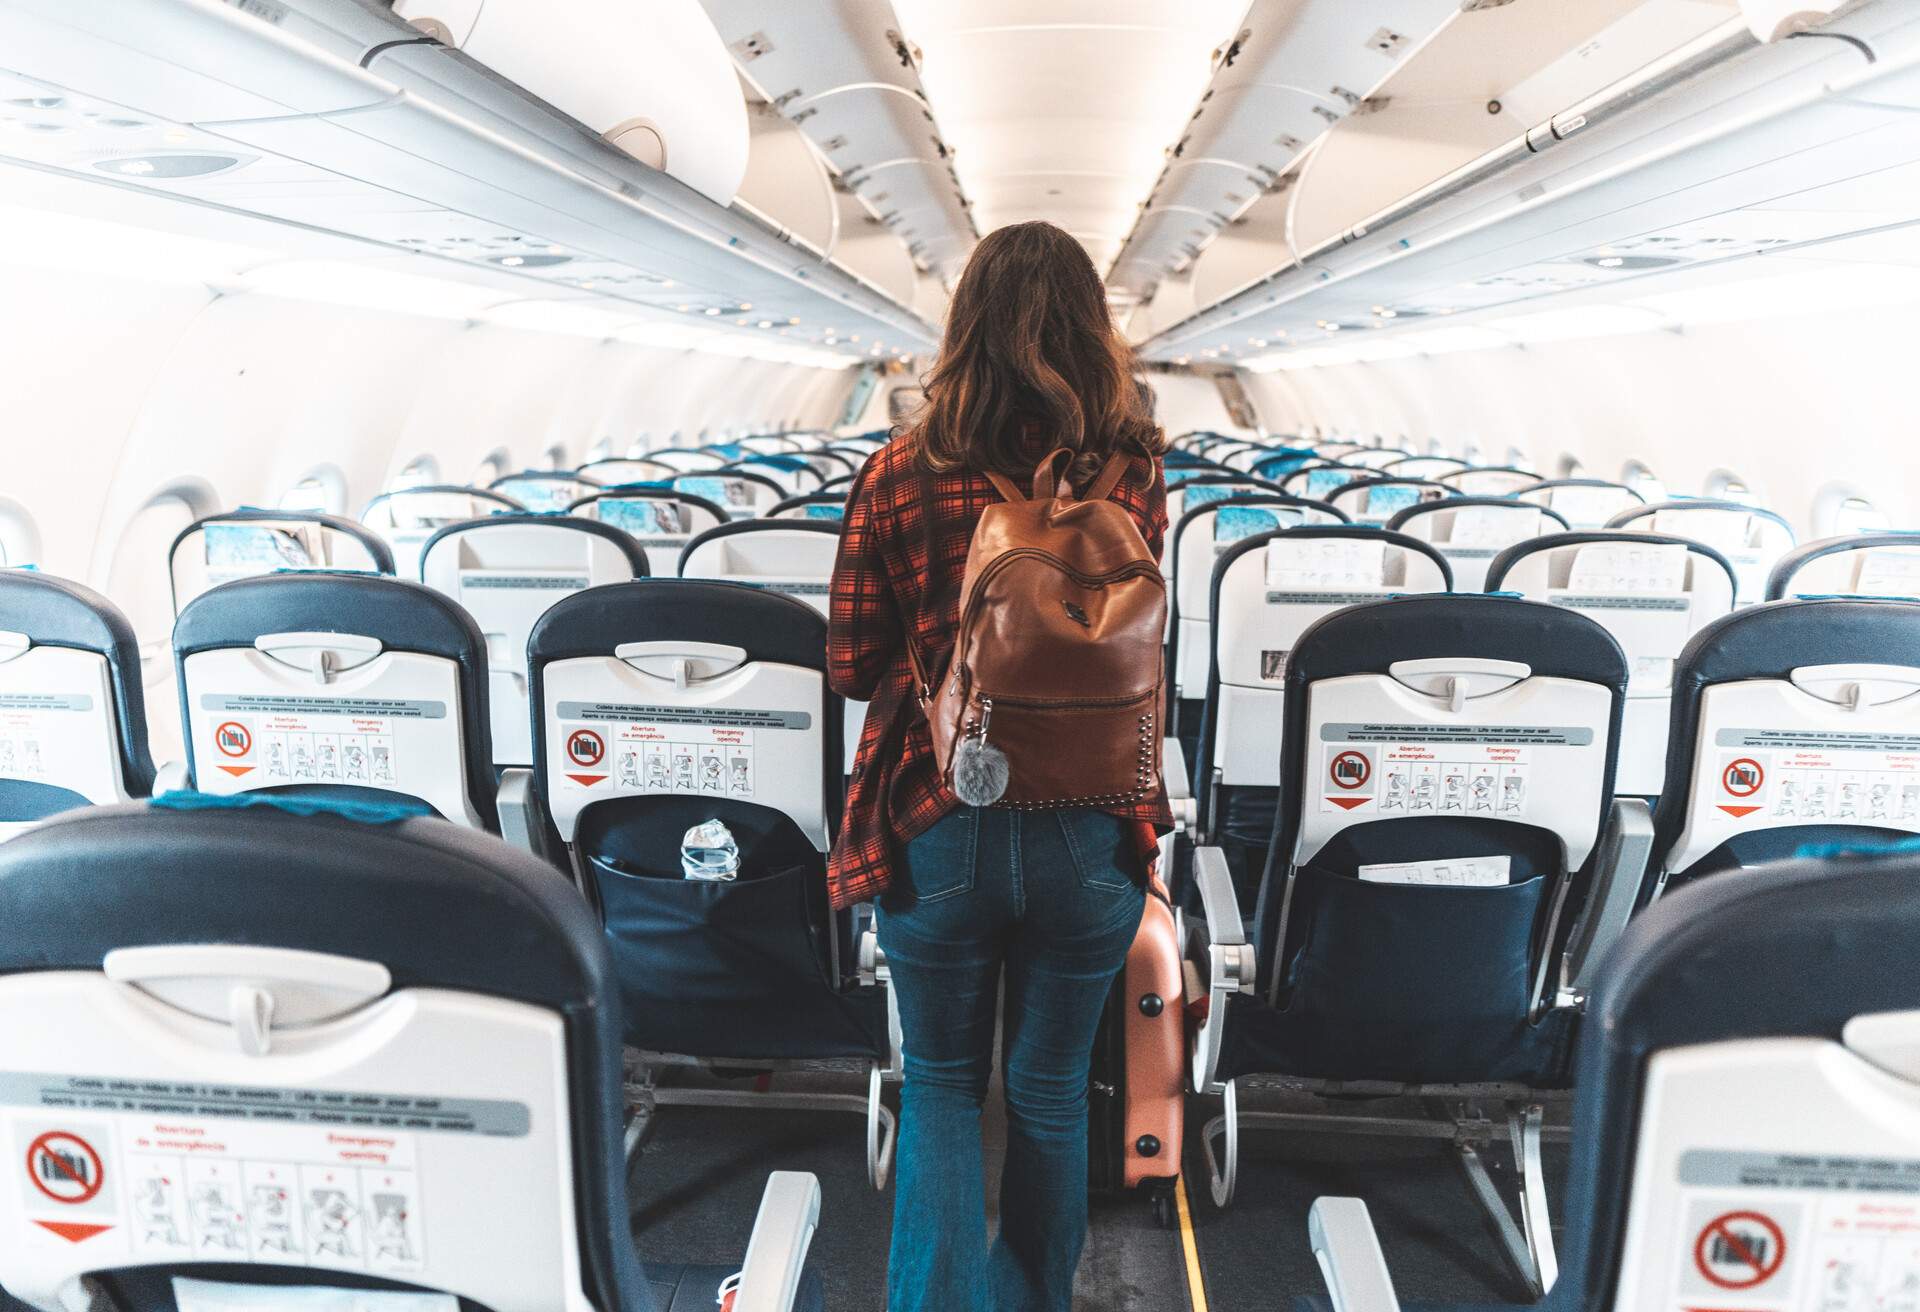 A passenger walks along the aisle of an airplane, passing rows of empty seats.